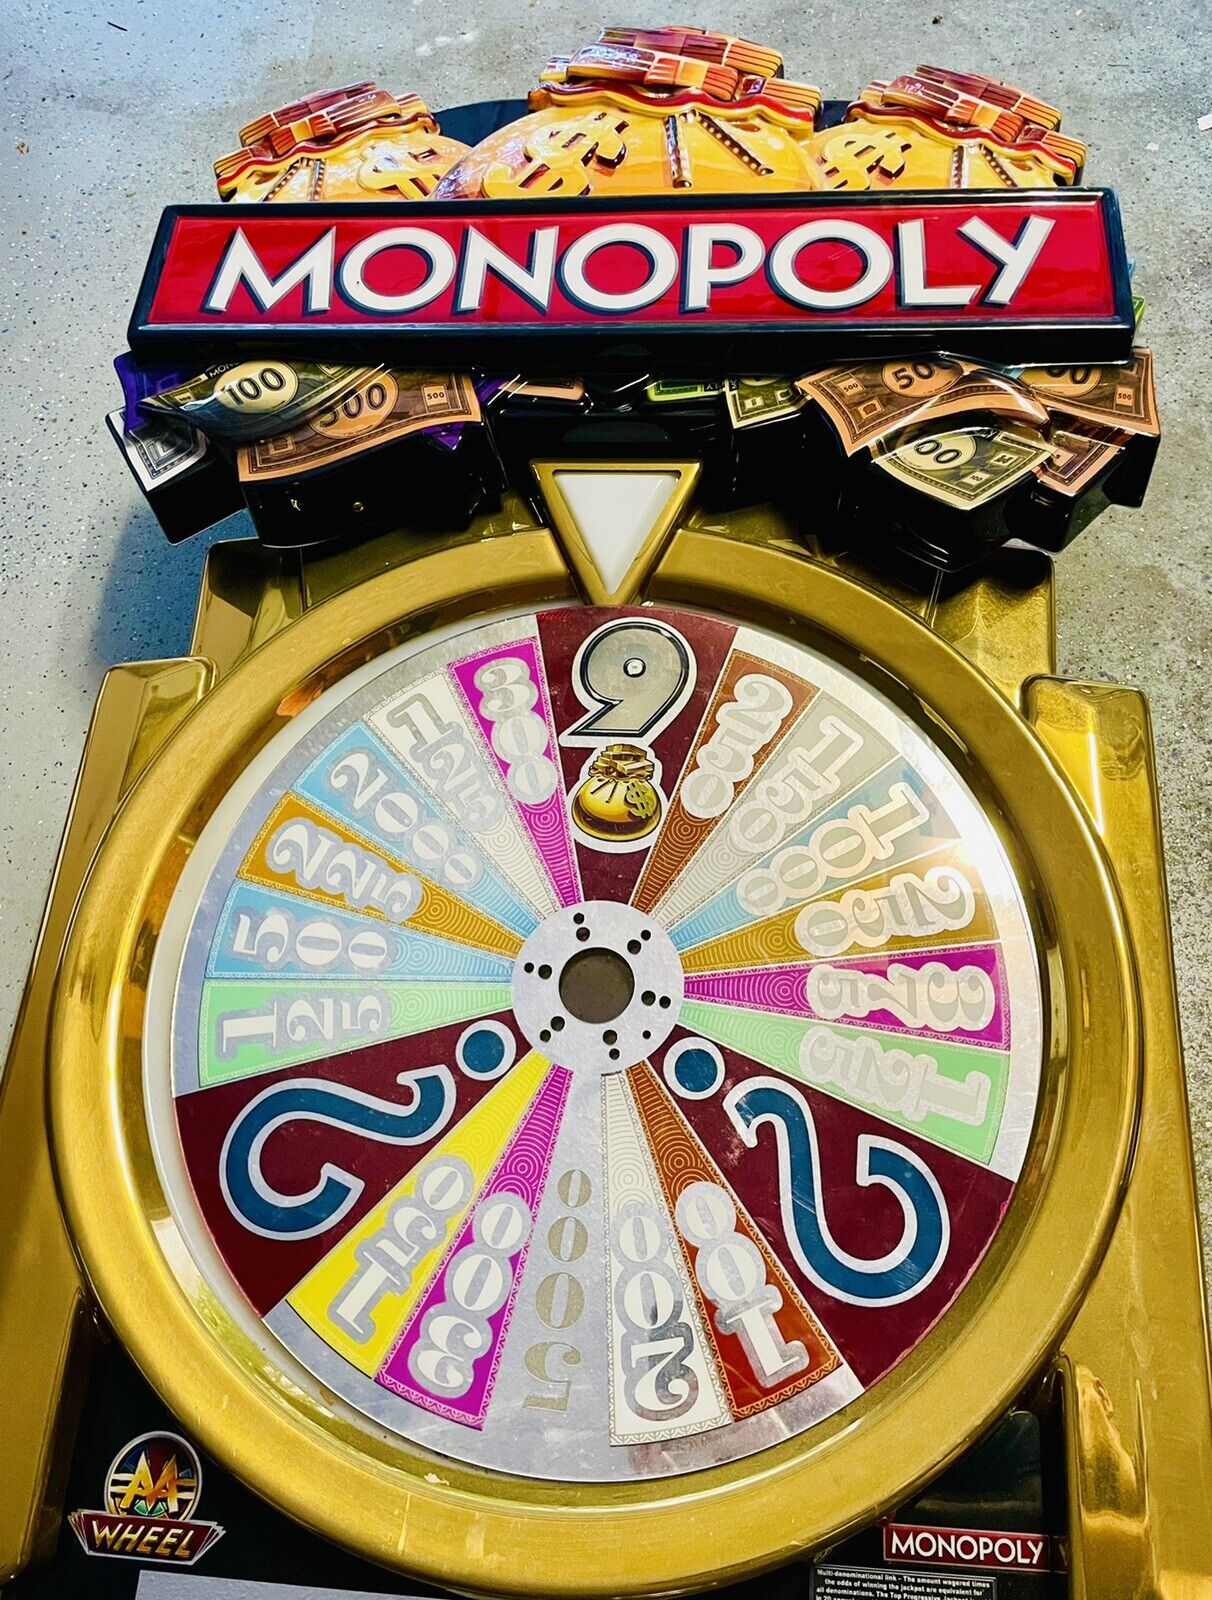 Monopoly Slot Machine Lighted Casino Topper with Detachable Fortune Wheel Facade